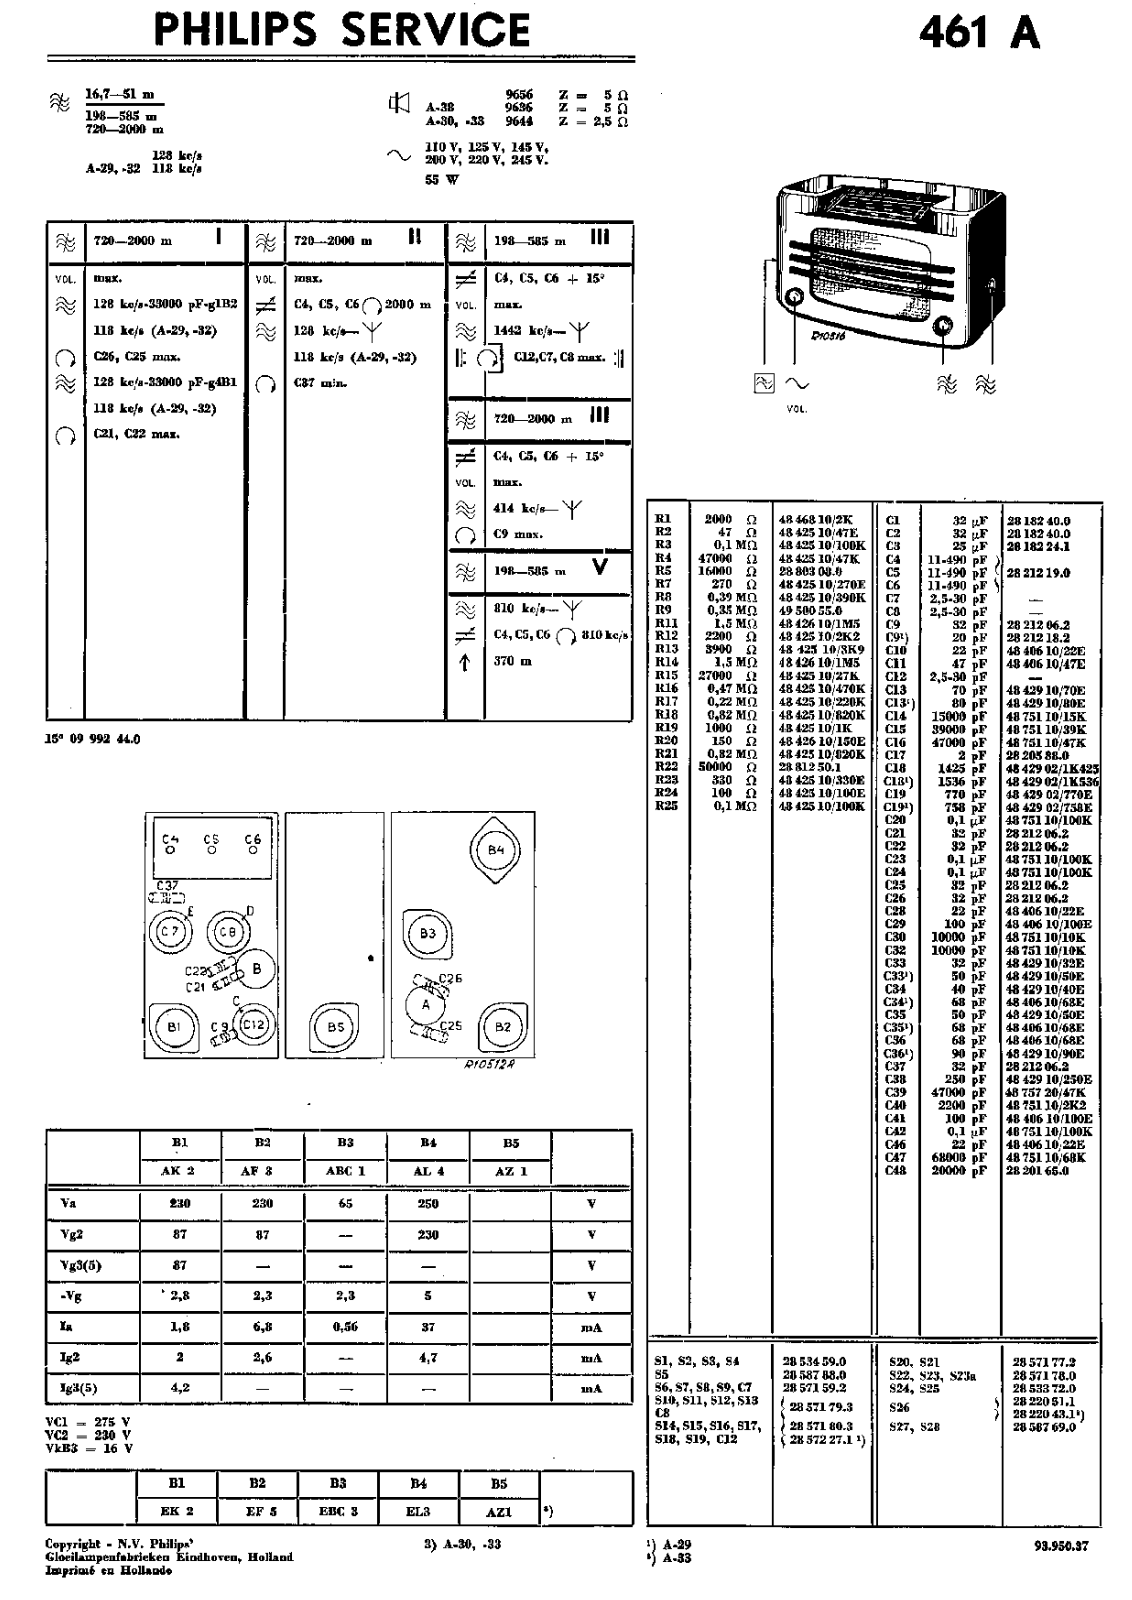 Philips 461-A Service Manual